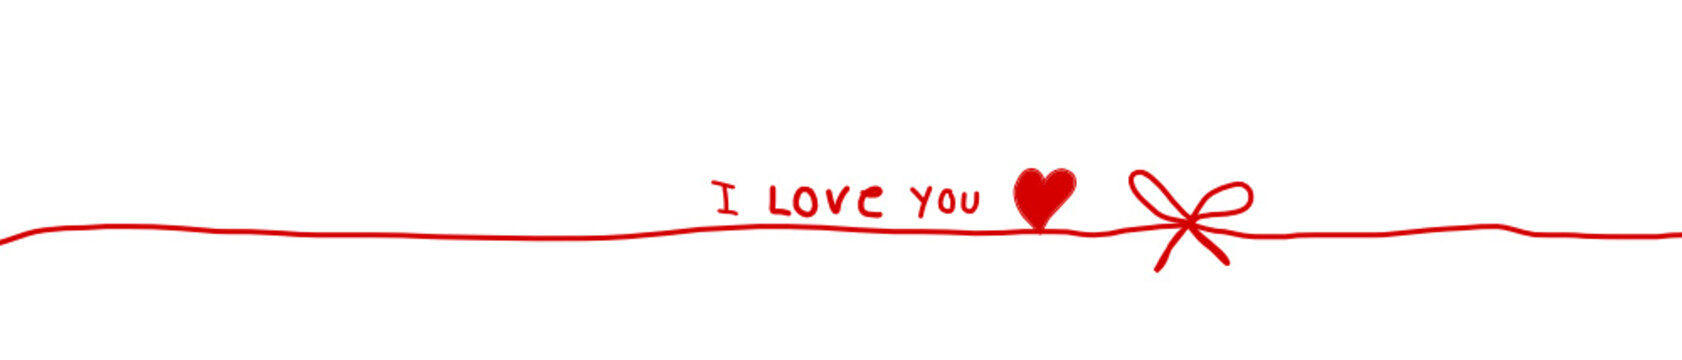 schleife rot i love you text gruß